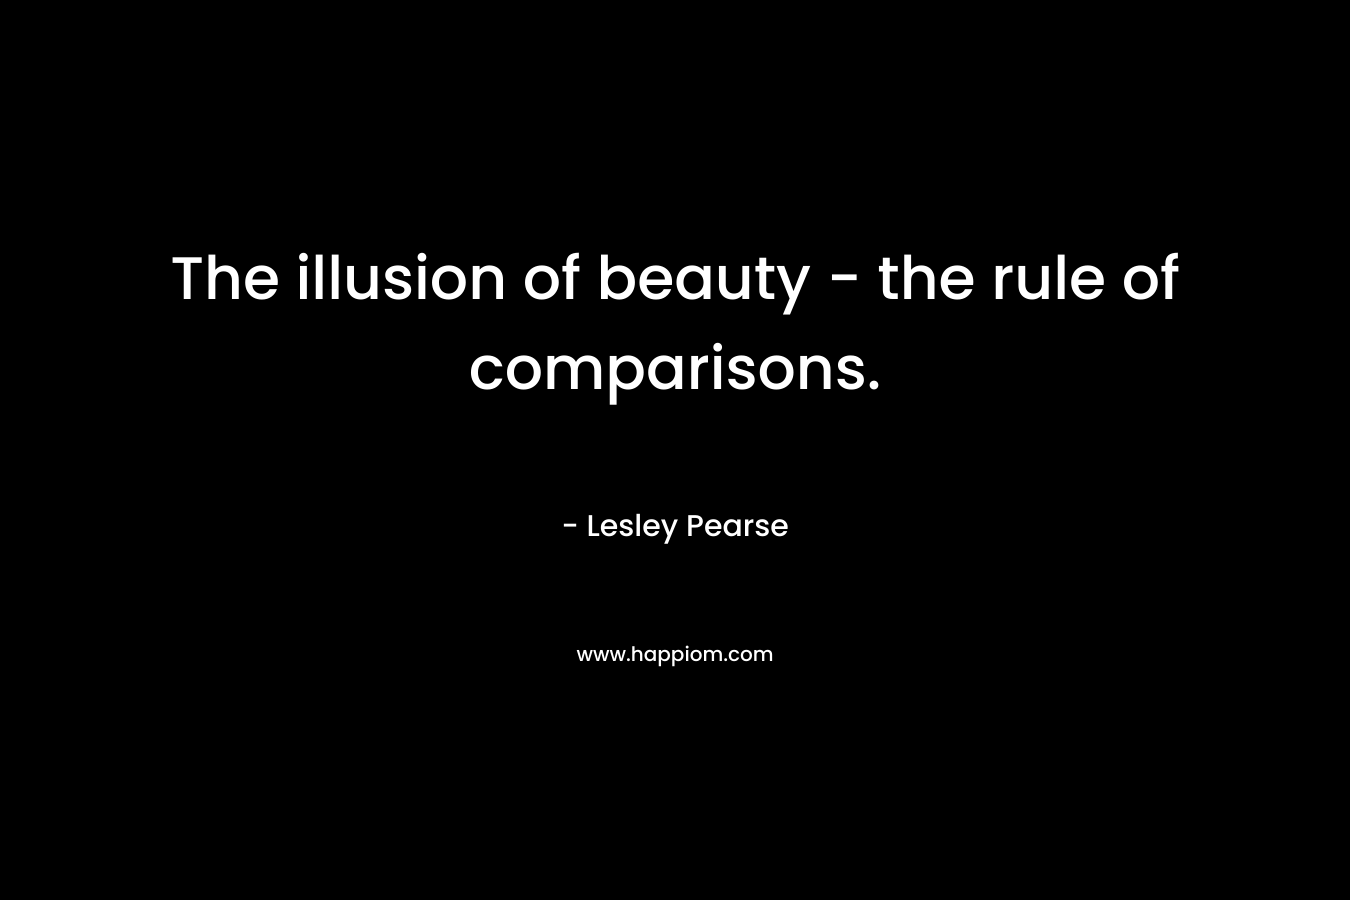 The illusion of beauty - the rule of comparisons.